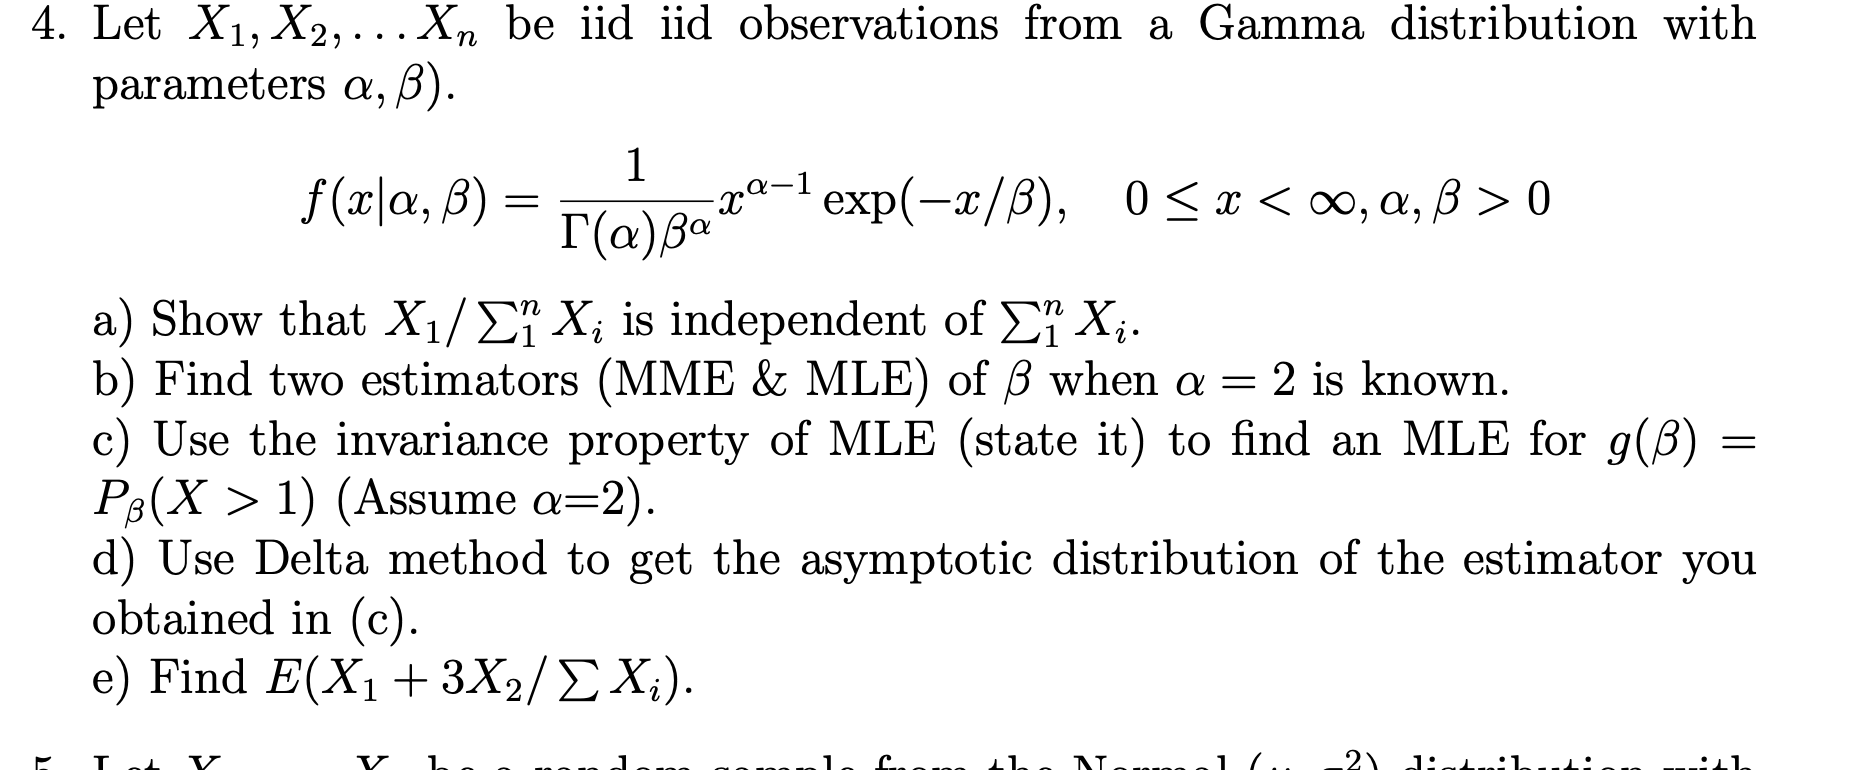 Gamm 4 Let X1 X2 Be Iid Iid Observations Chegg Com